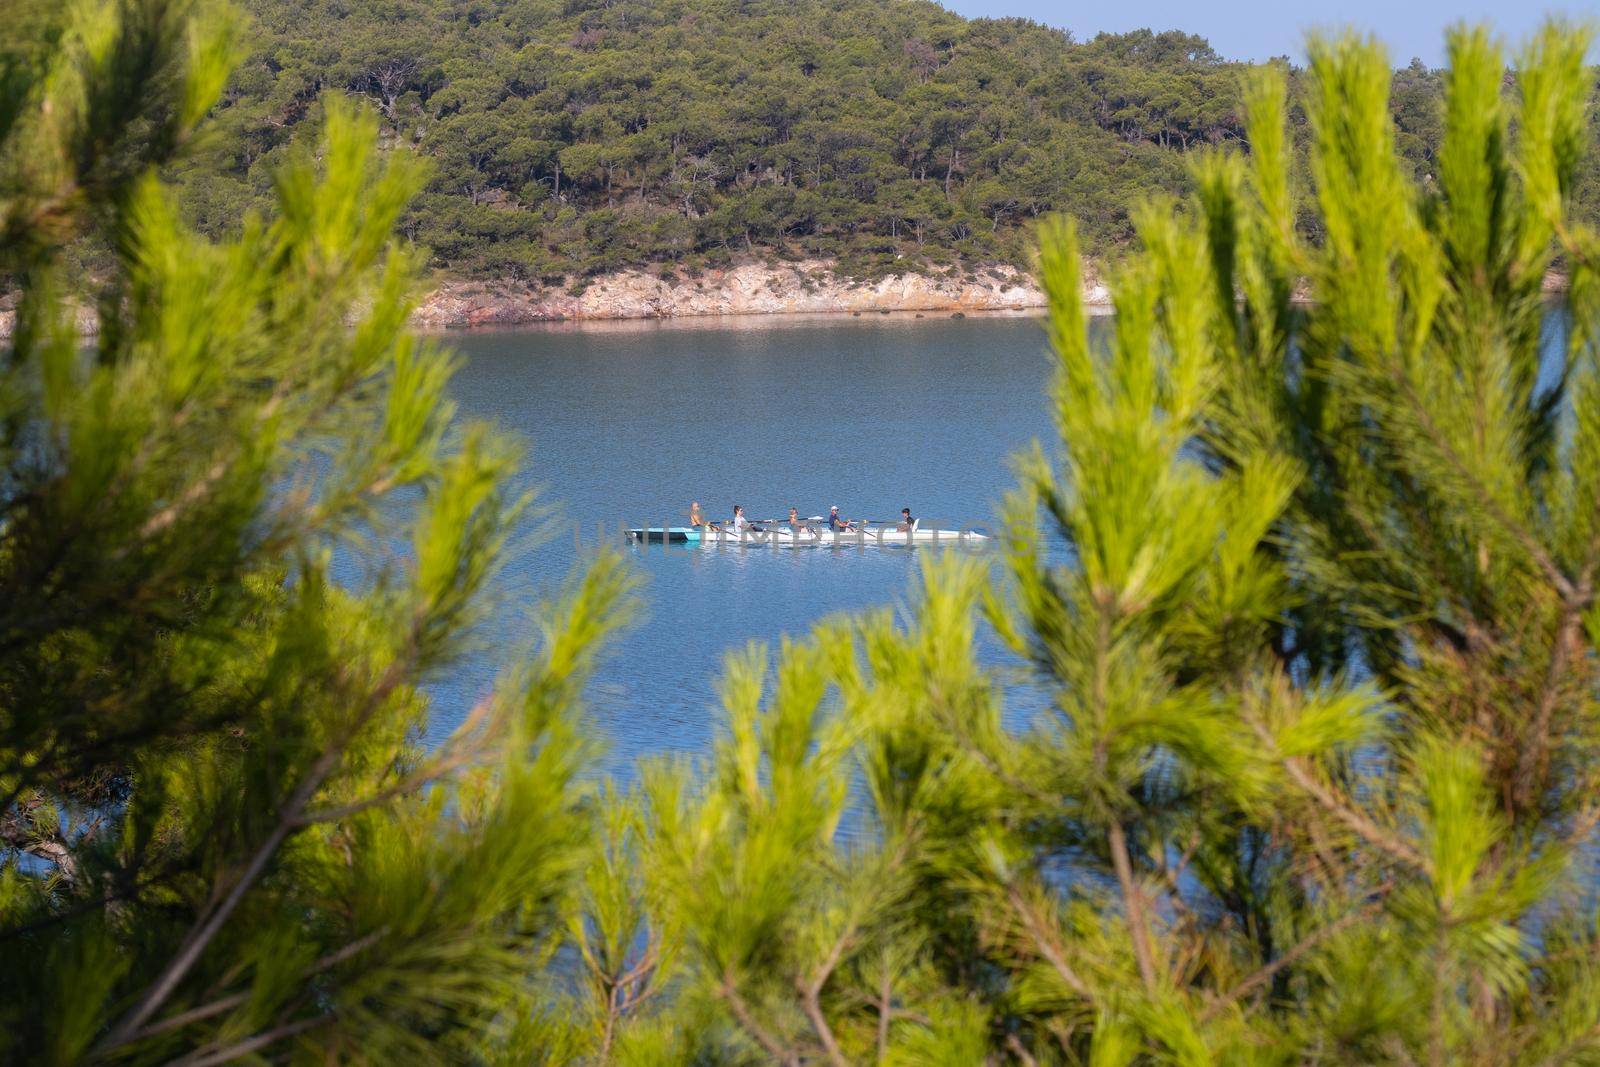 rowing team paddles on the tranquil sea. High quality photo